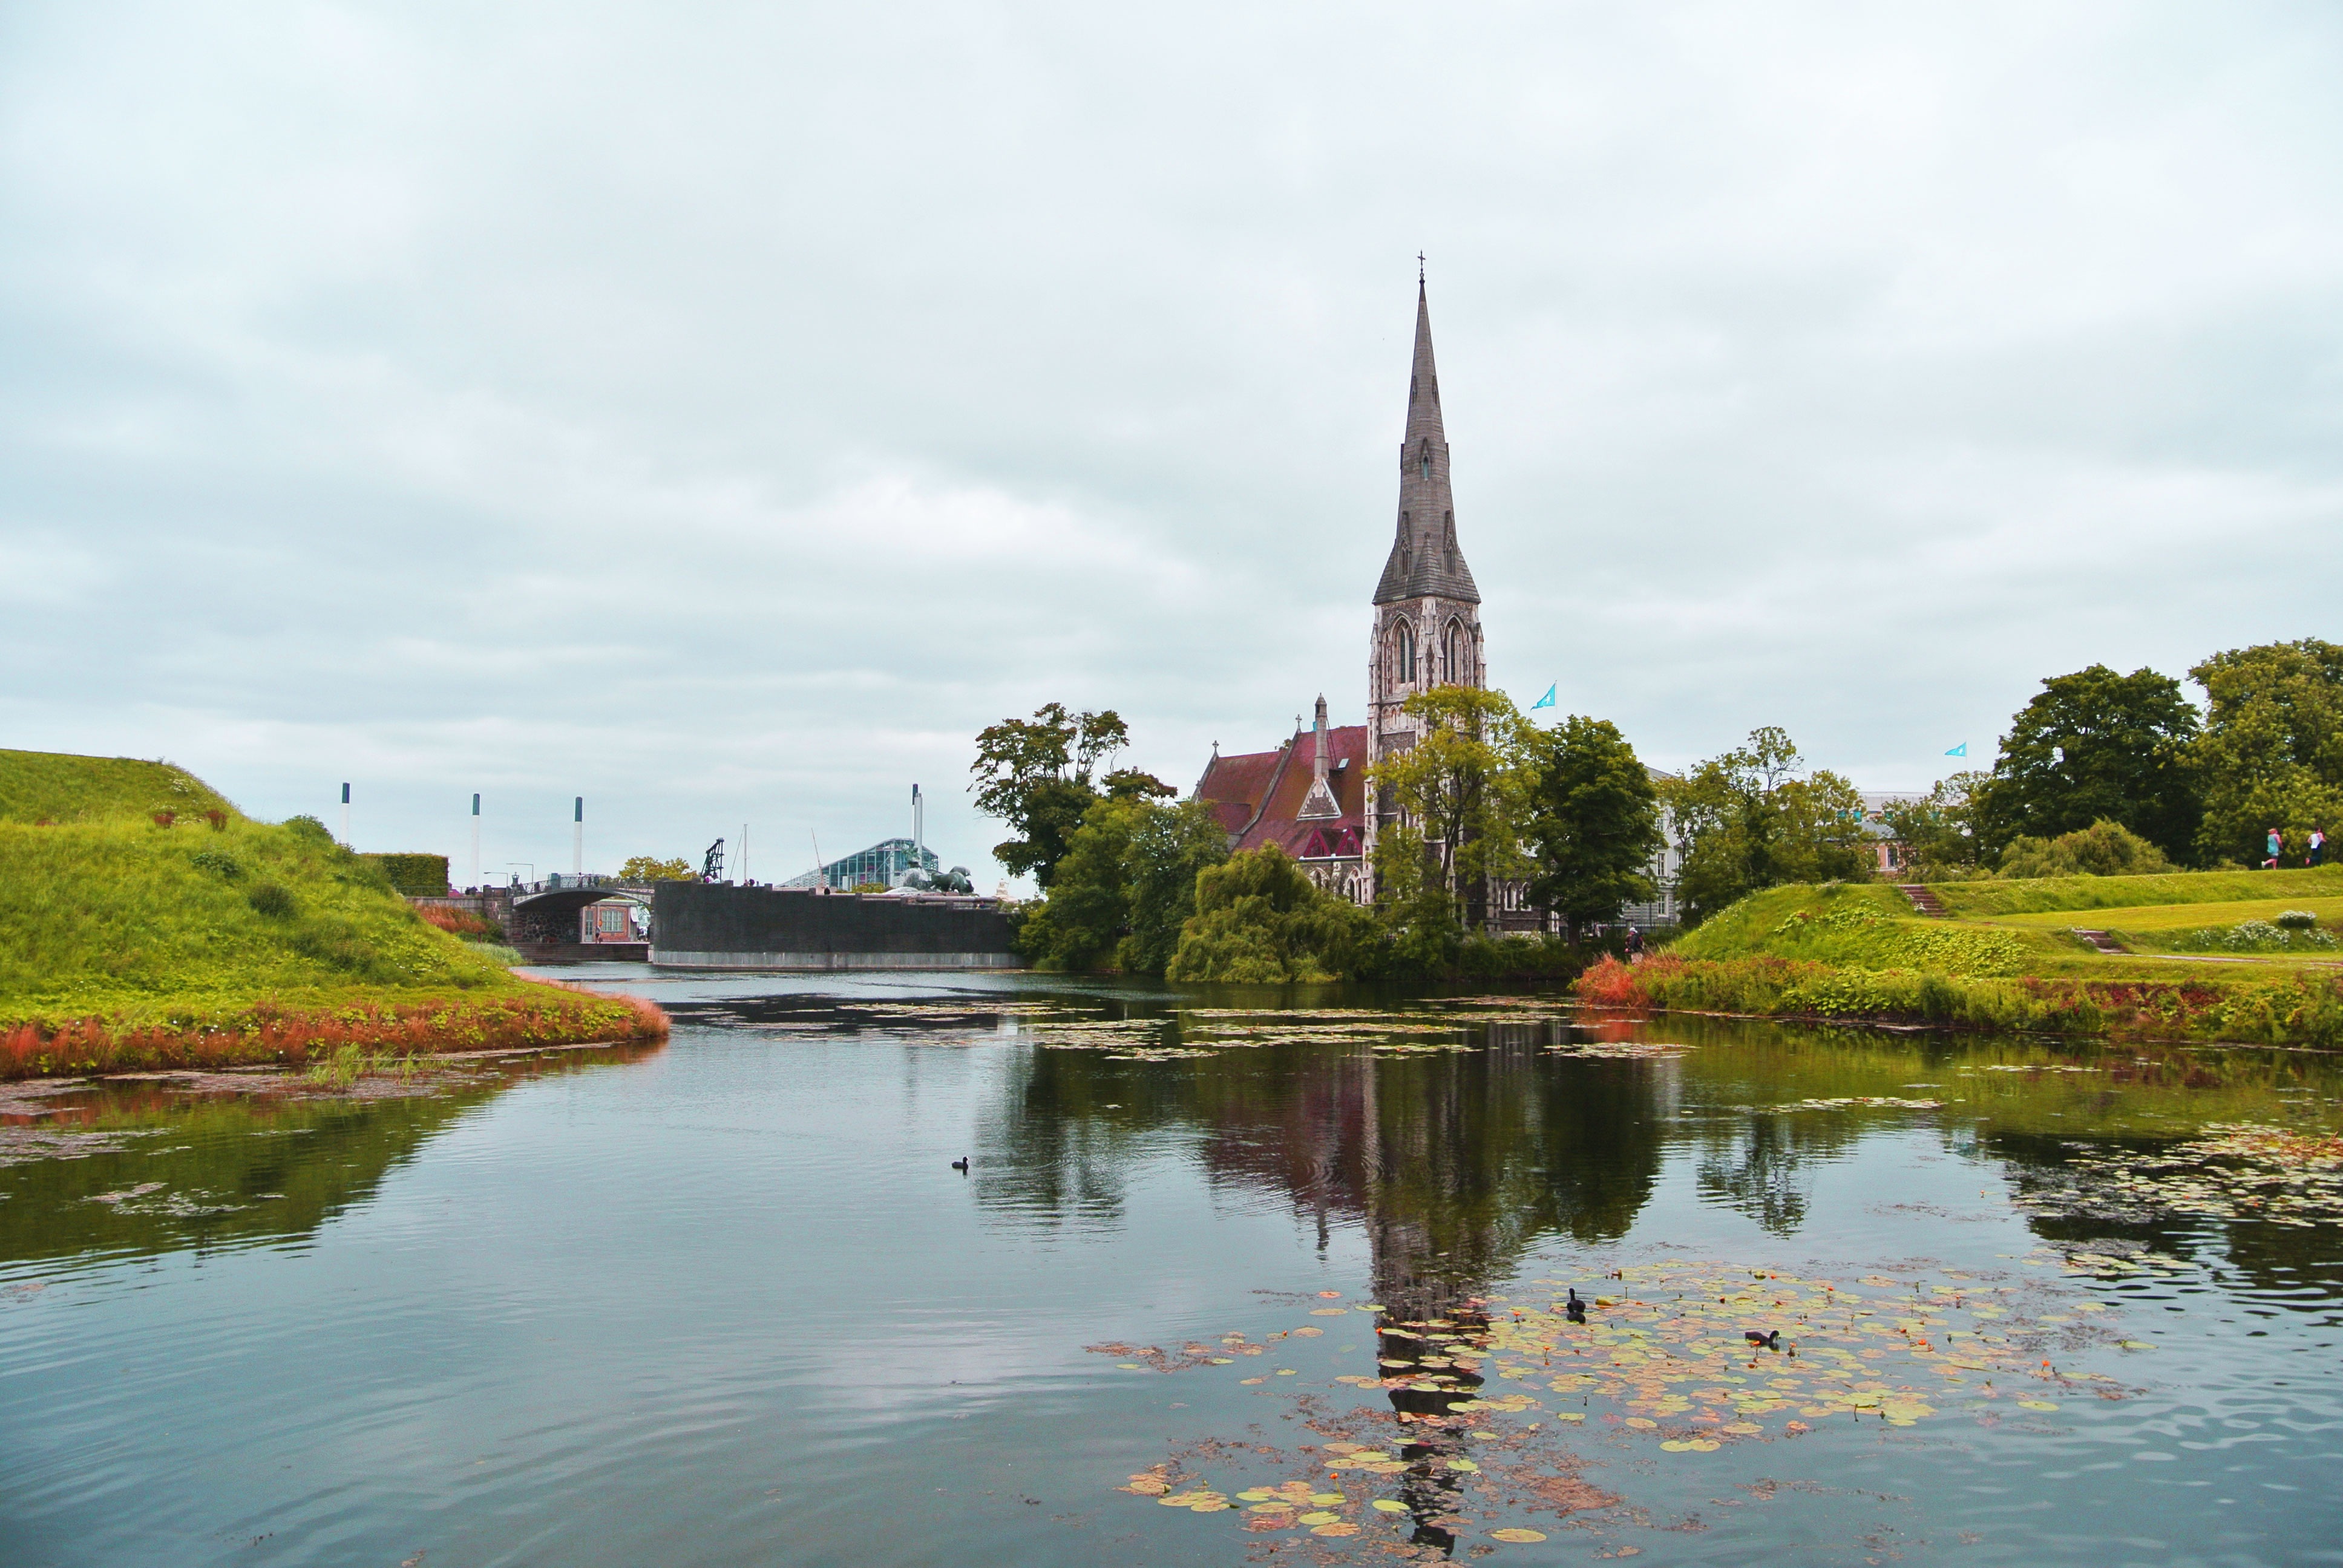 Free Images : lake, river, pond, reflection, tower, church, tourism ...